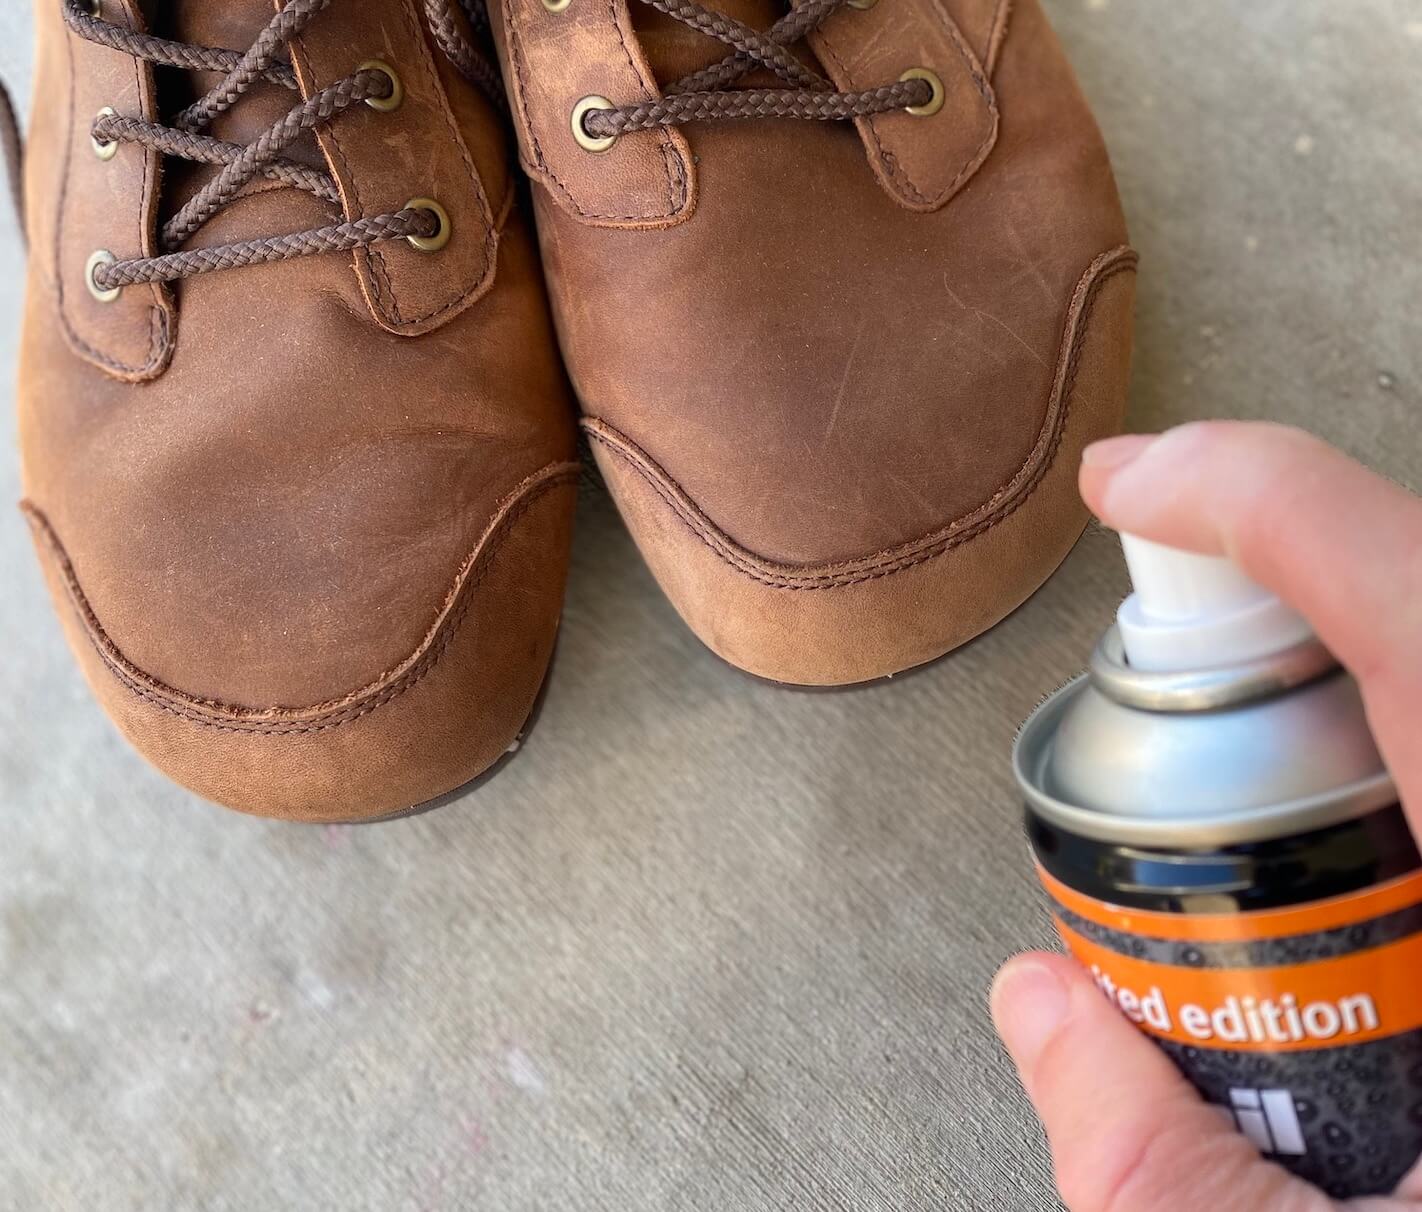 The Sneaker Grip Spray That Will Give You An Edge: Our Review